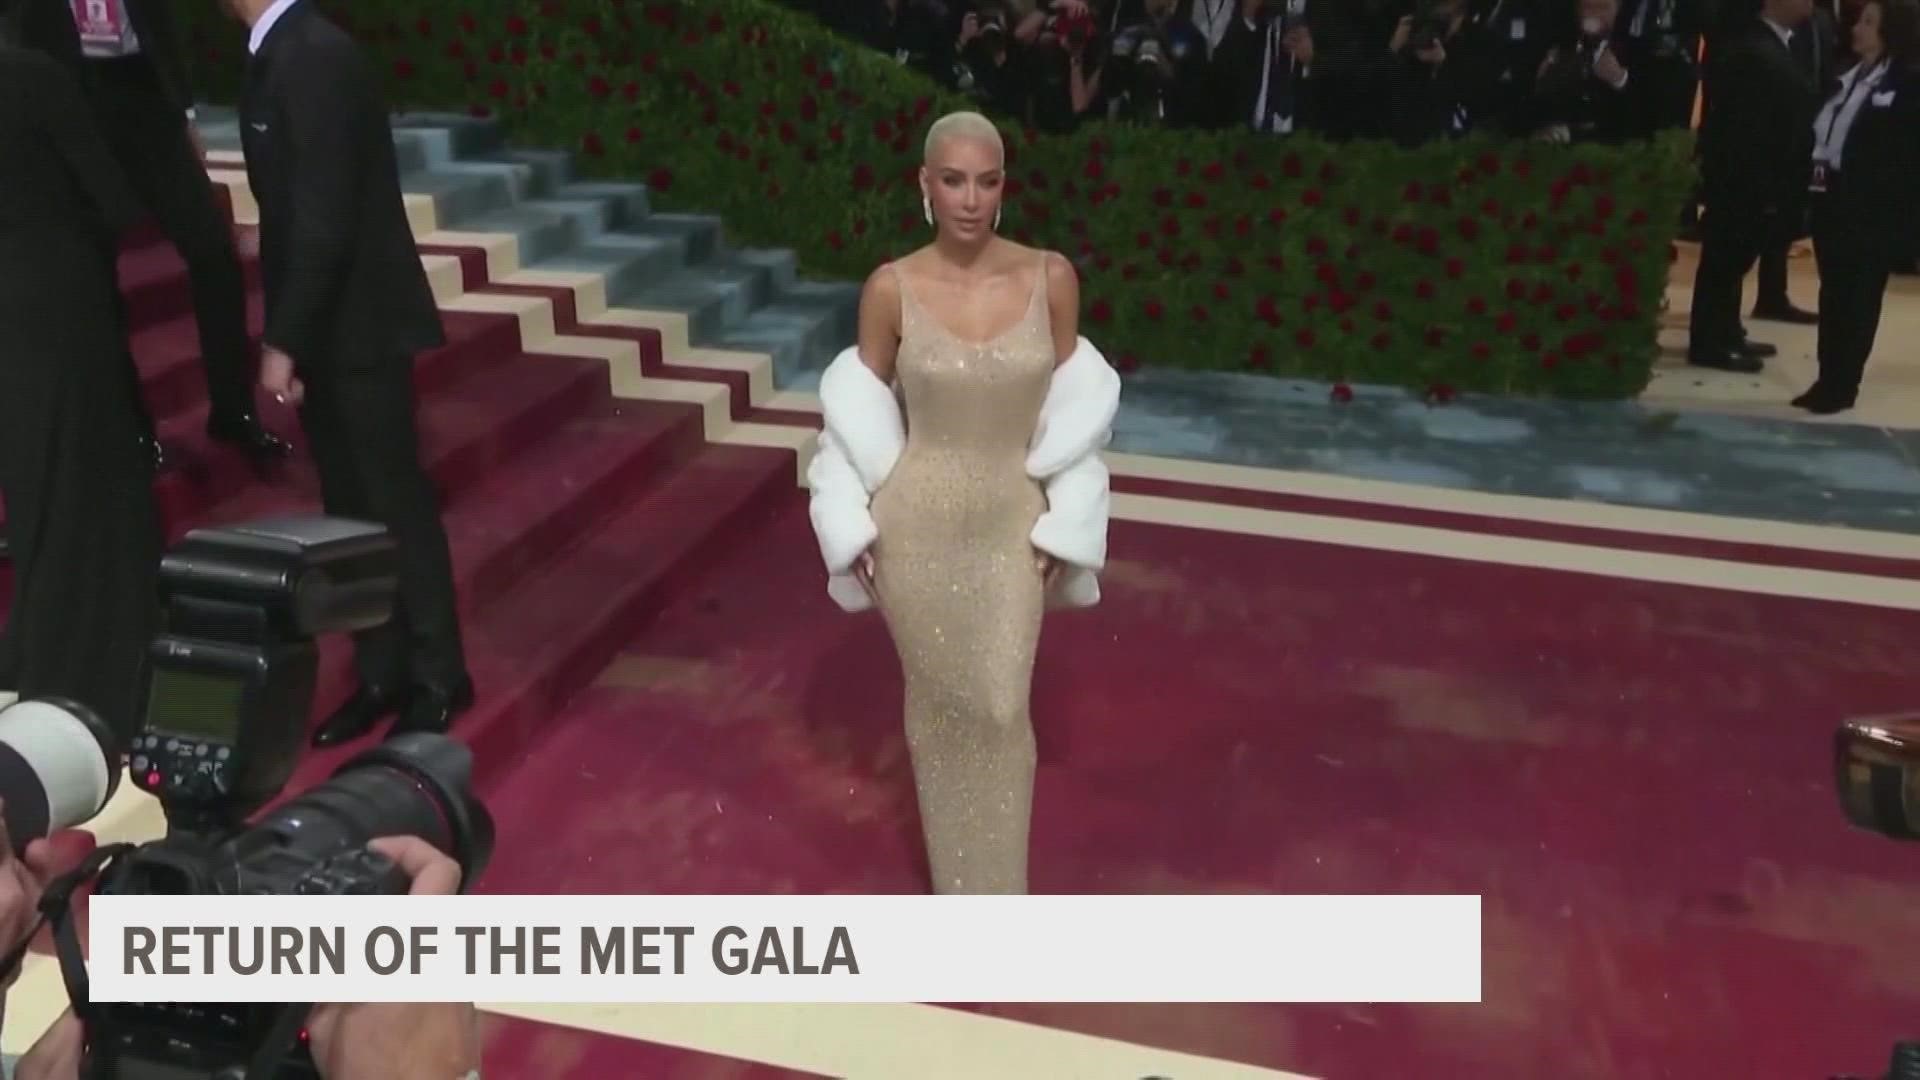 The event came back with a "Gilded Glamour" theme, and Kim Kardashian ended up stealing the show with a dress made famous by Marilyn Monroe.